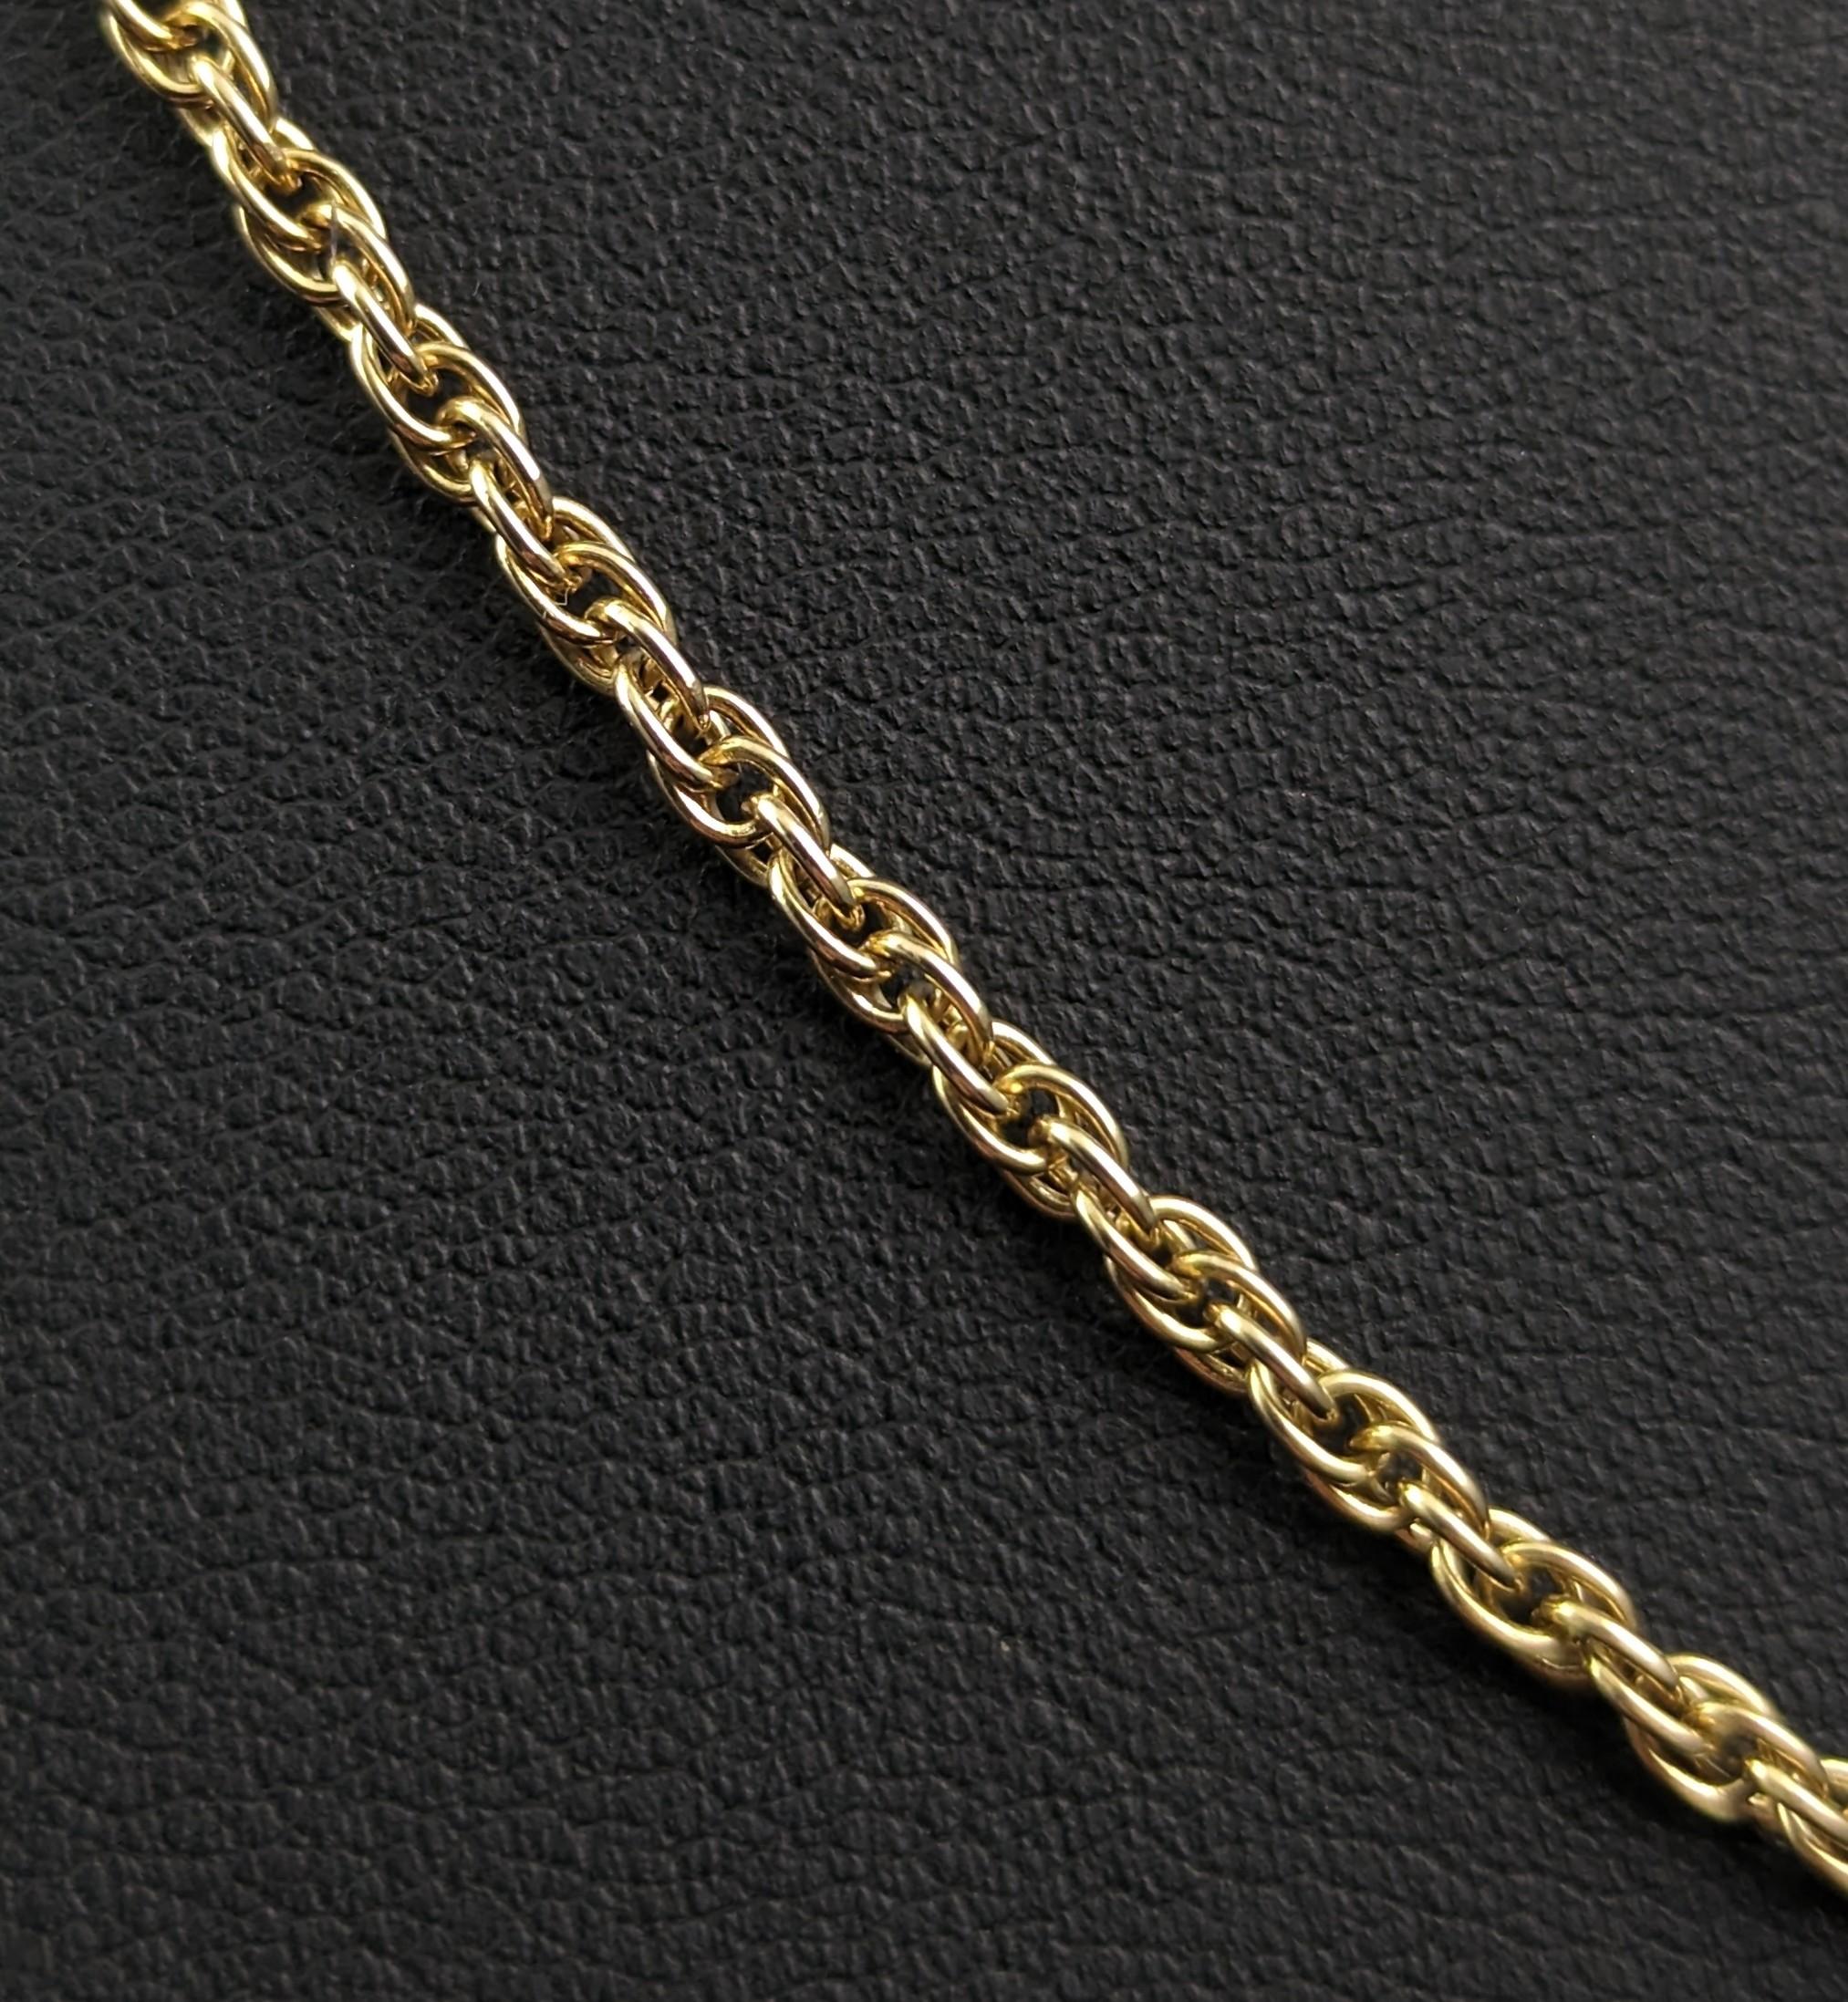 Vintage 9k Yellow Gold Fancy Link Chain Necklace For Sale 3